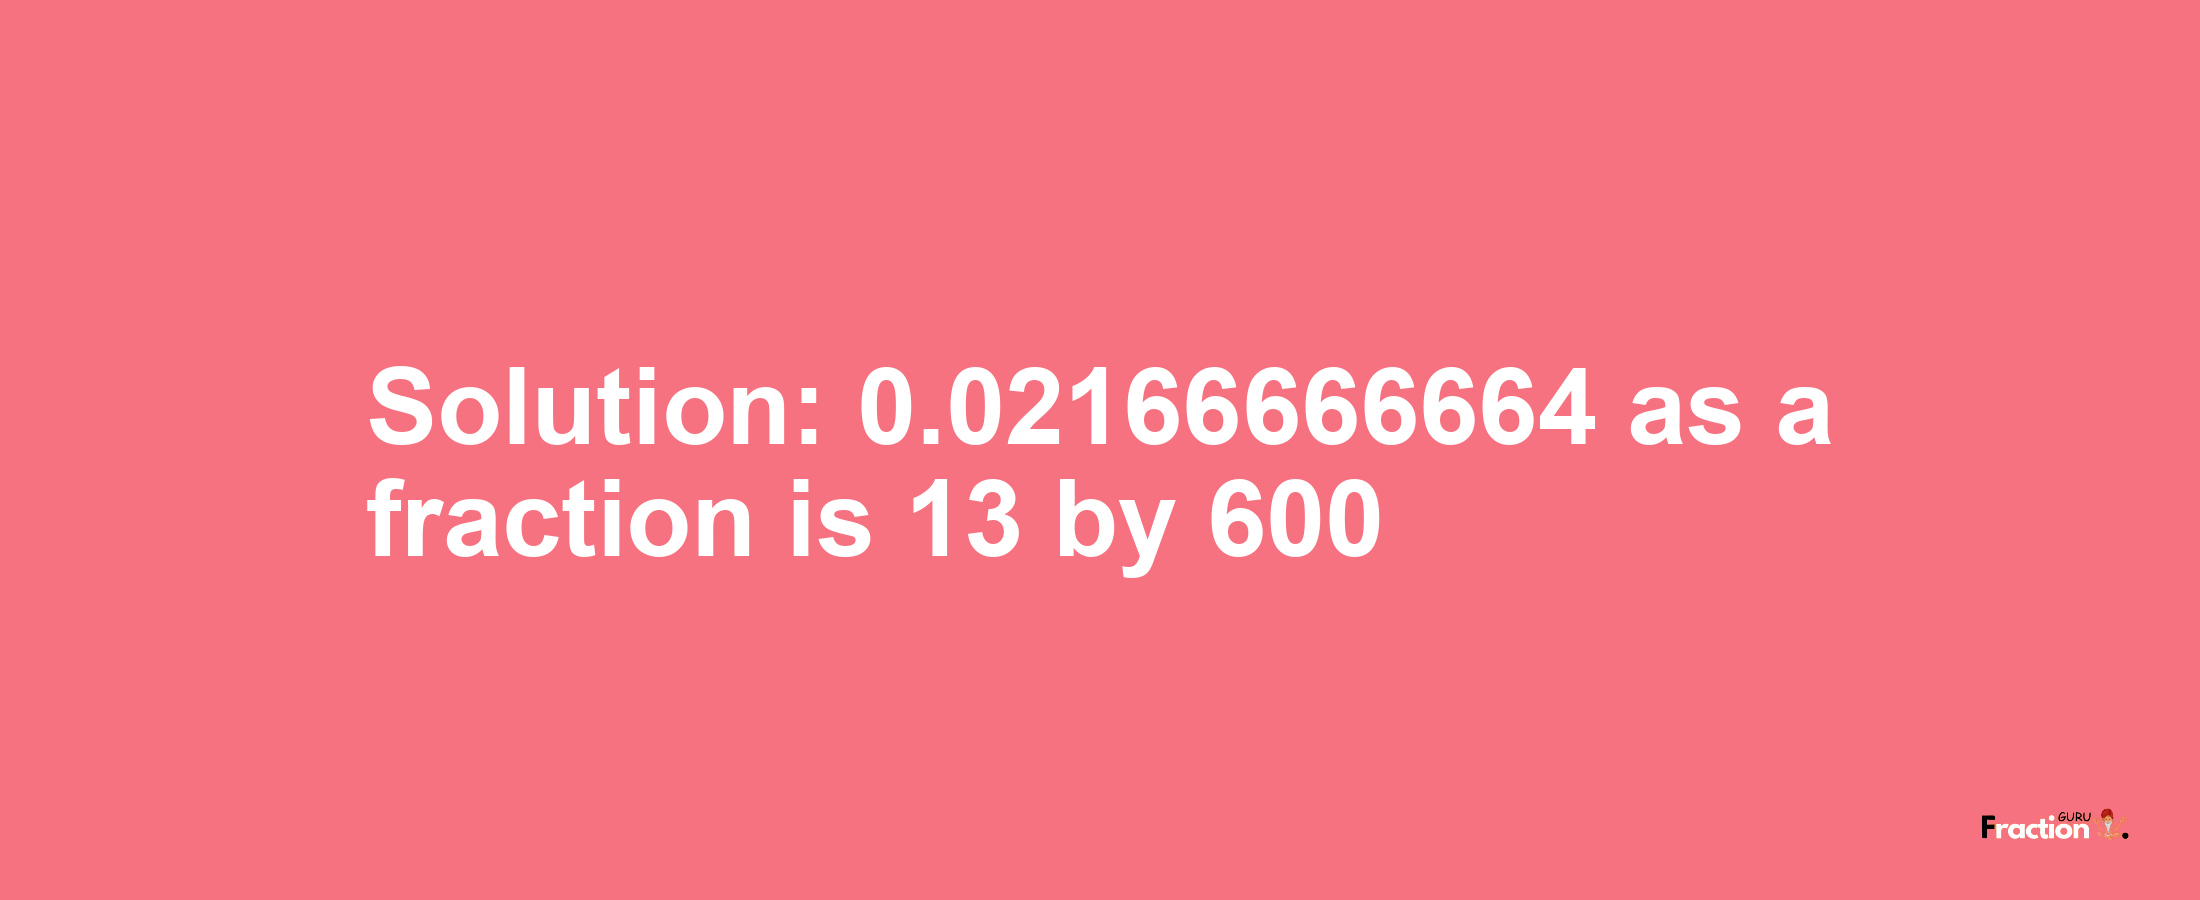 Solution:0.02166666664 as a fraction is 13/600